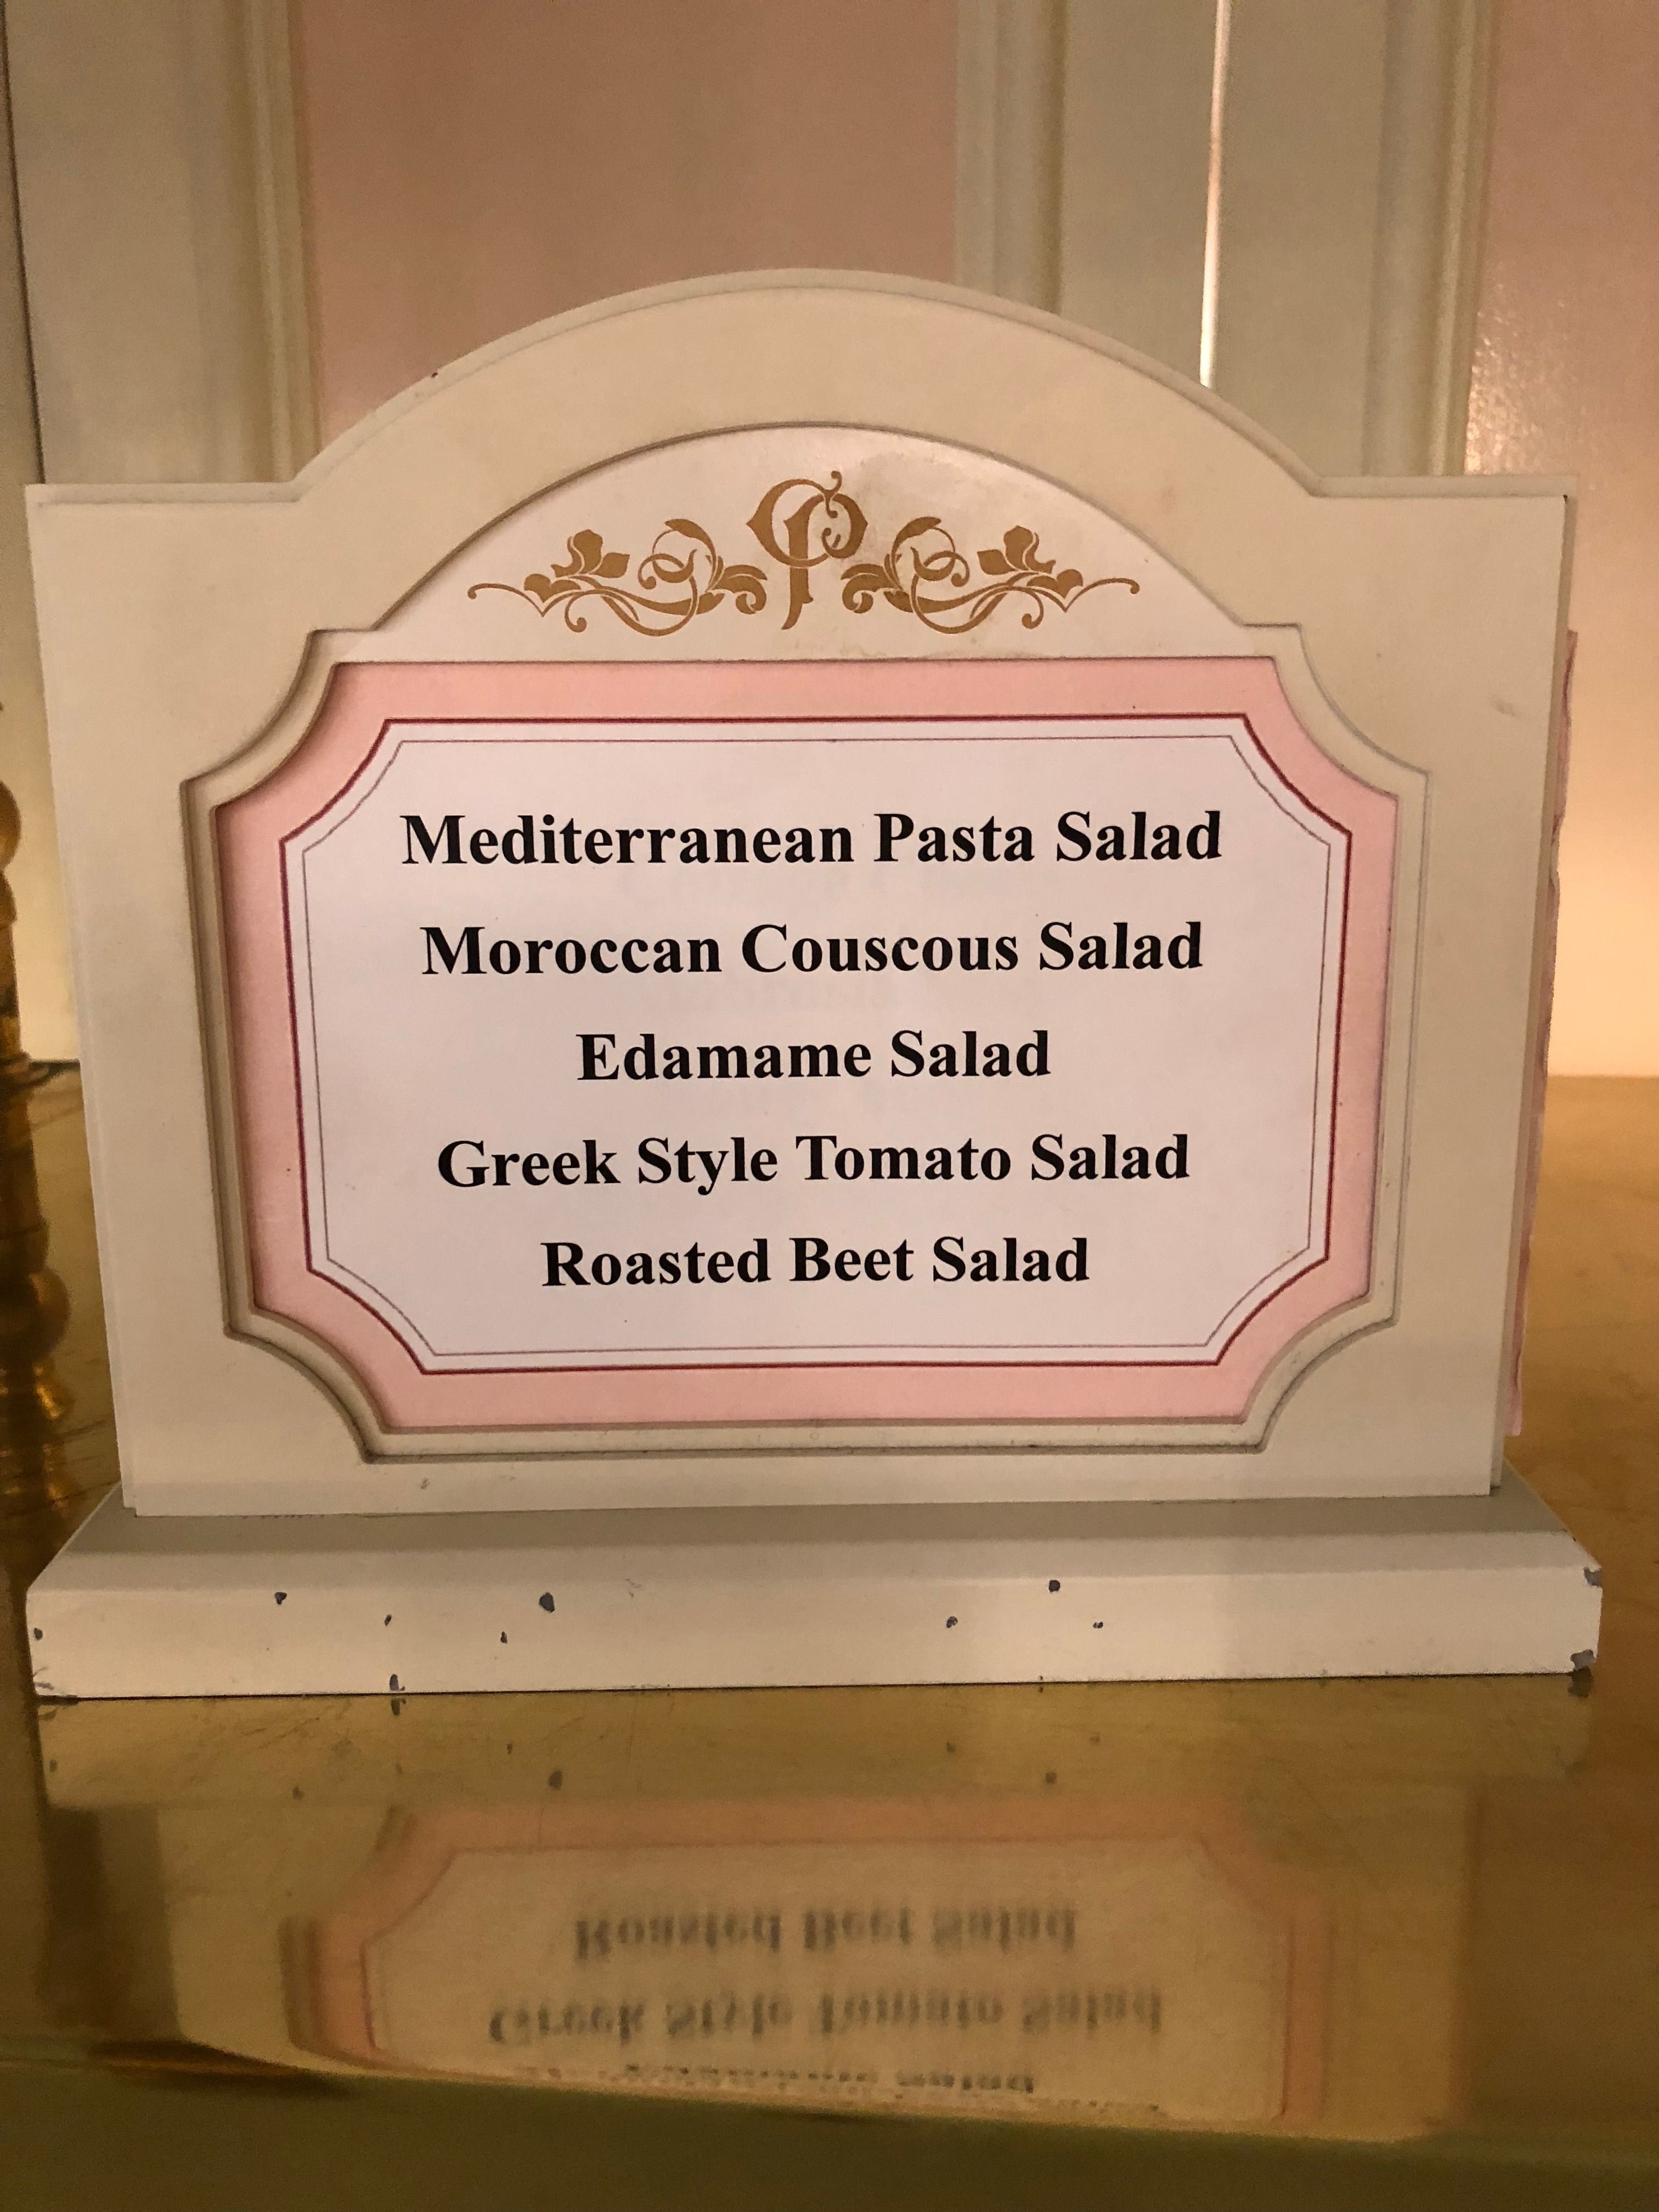 Moroccan Couscous Sald sign Lunch Buffet in Walt Disney World at Crystal Palace!.jpg